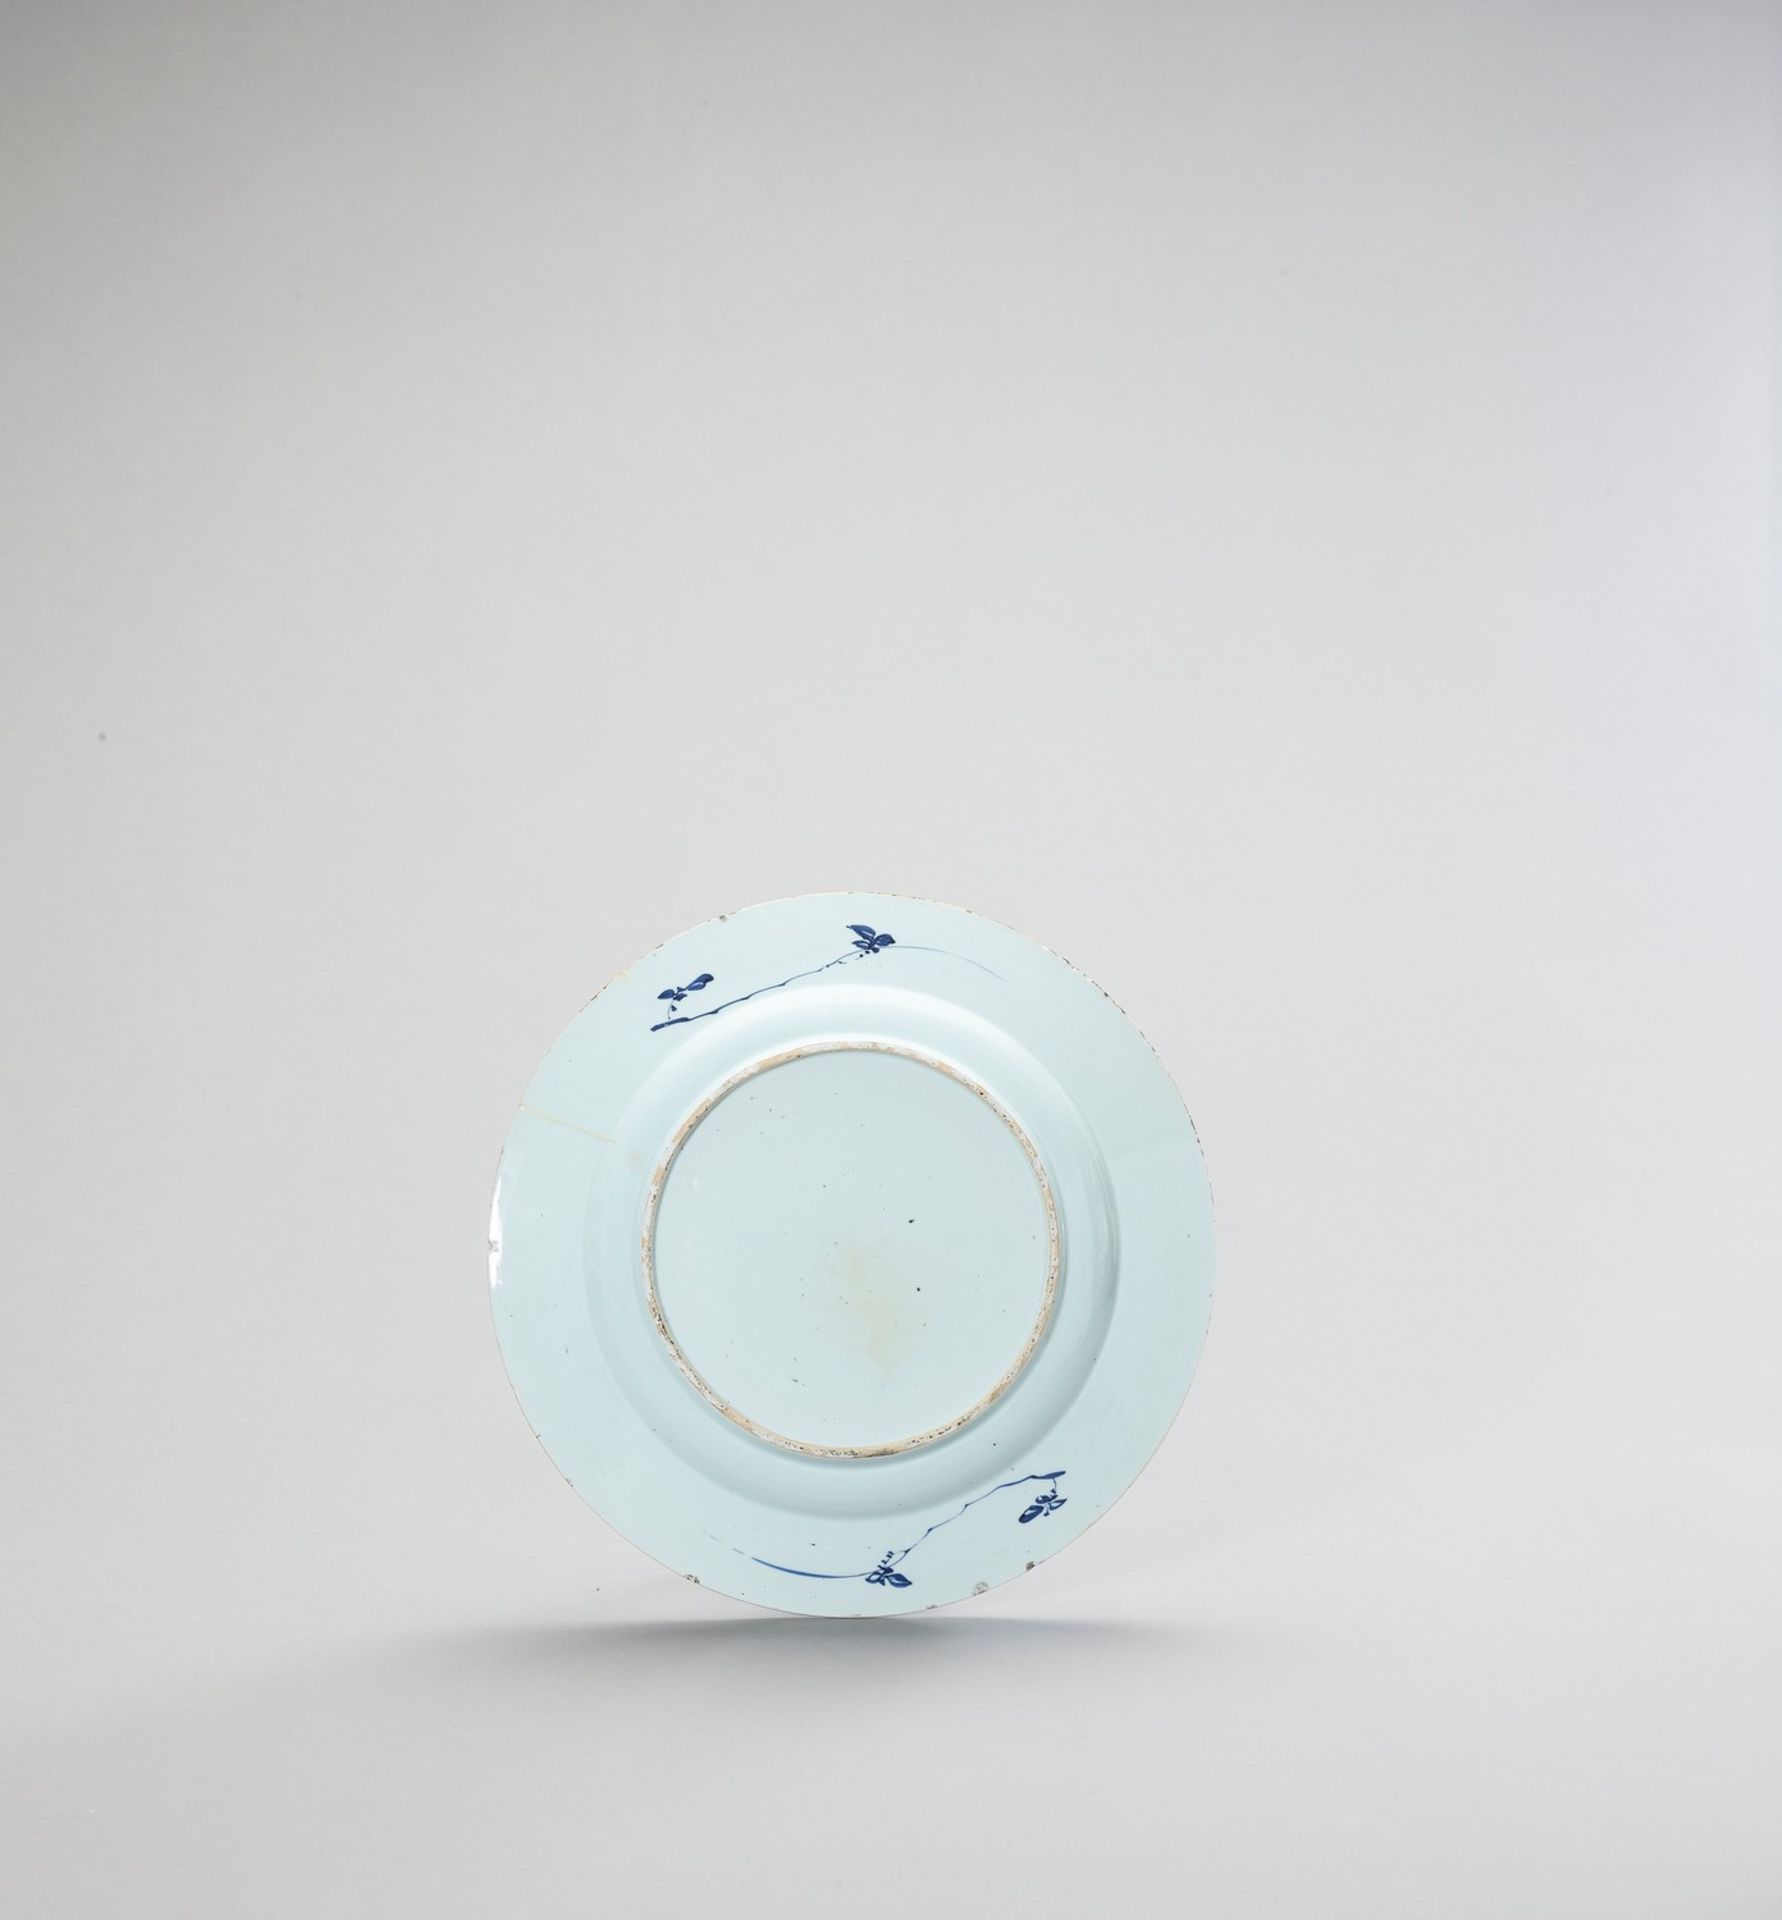 A PAIR OF LARGE BLUE AND WHITE PORCELAIN PLATES - Image 4 of 7